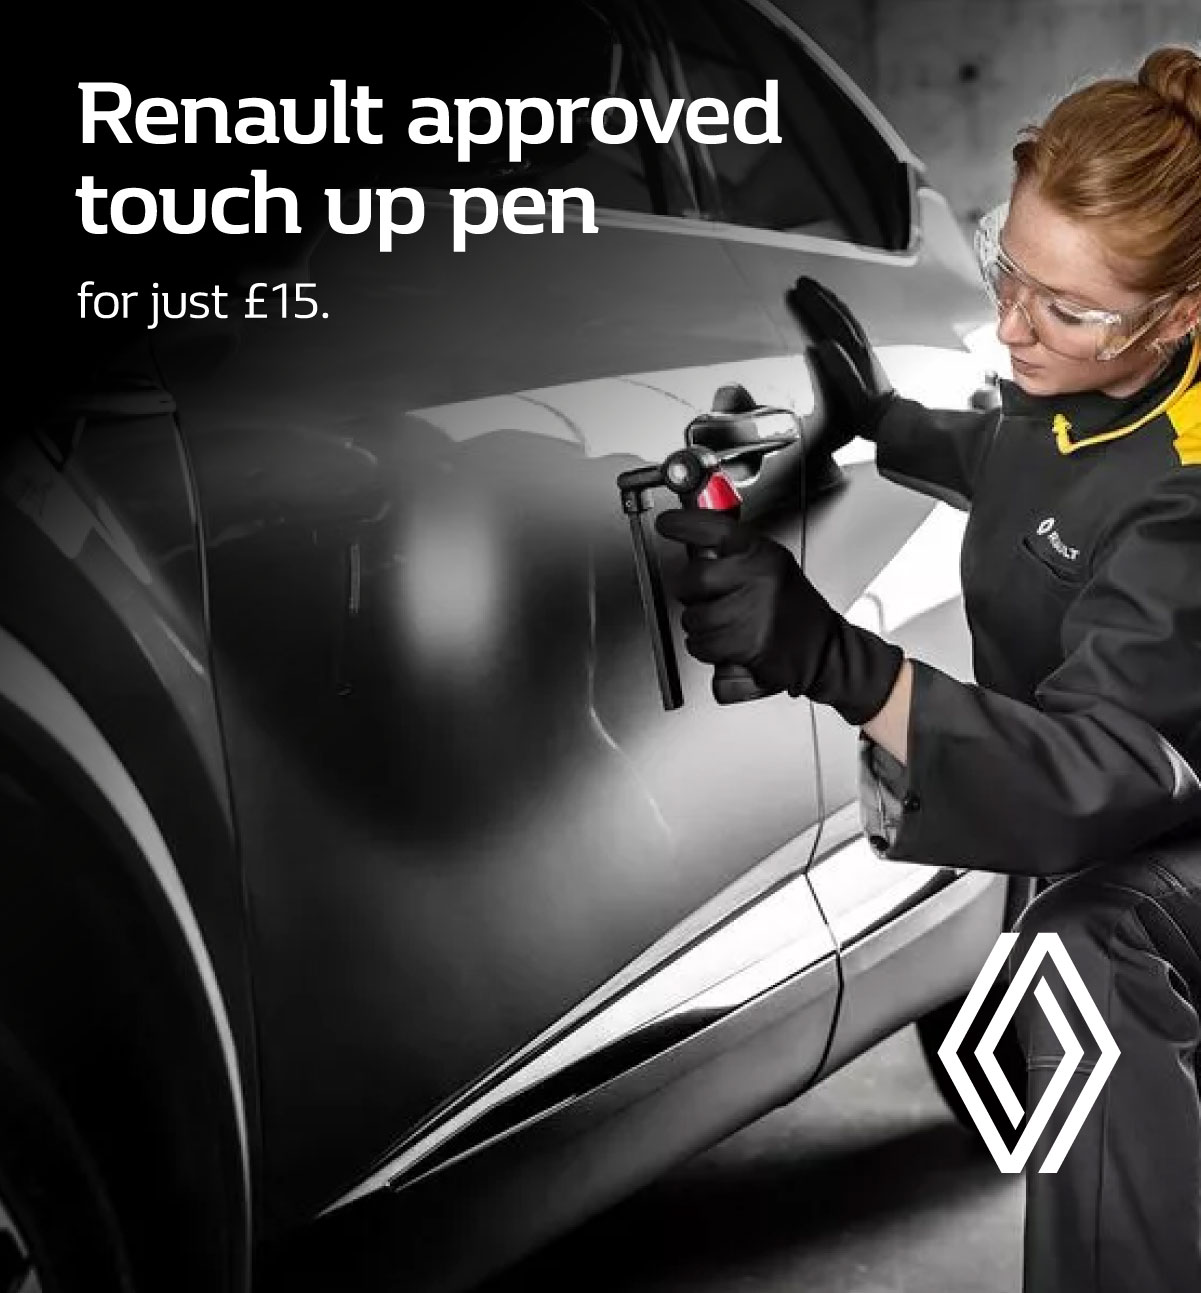 Renault Touch Up Pen